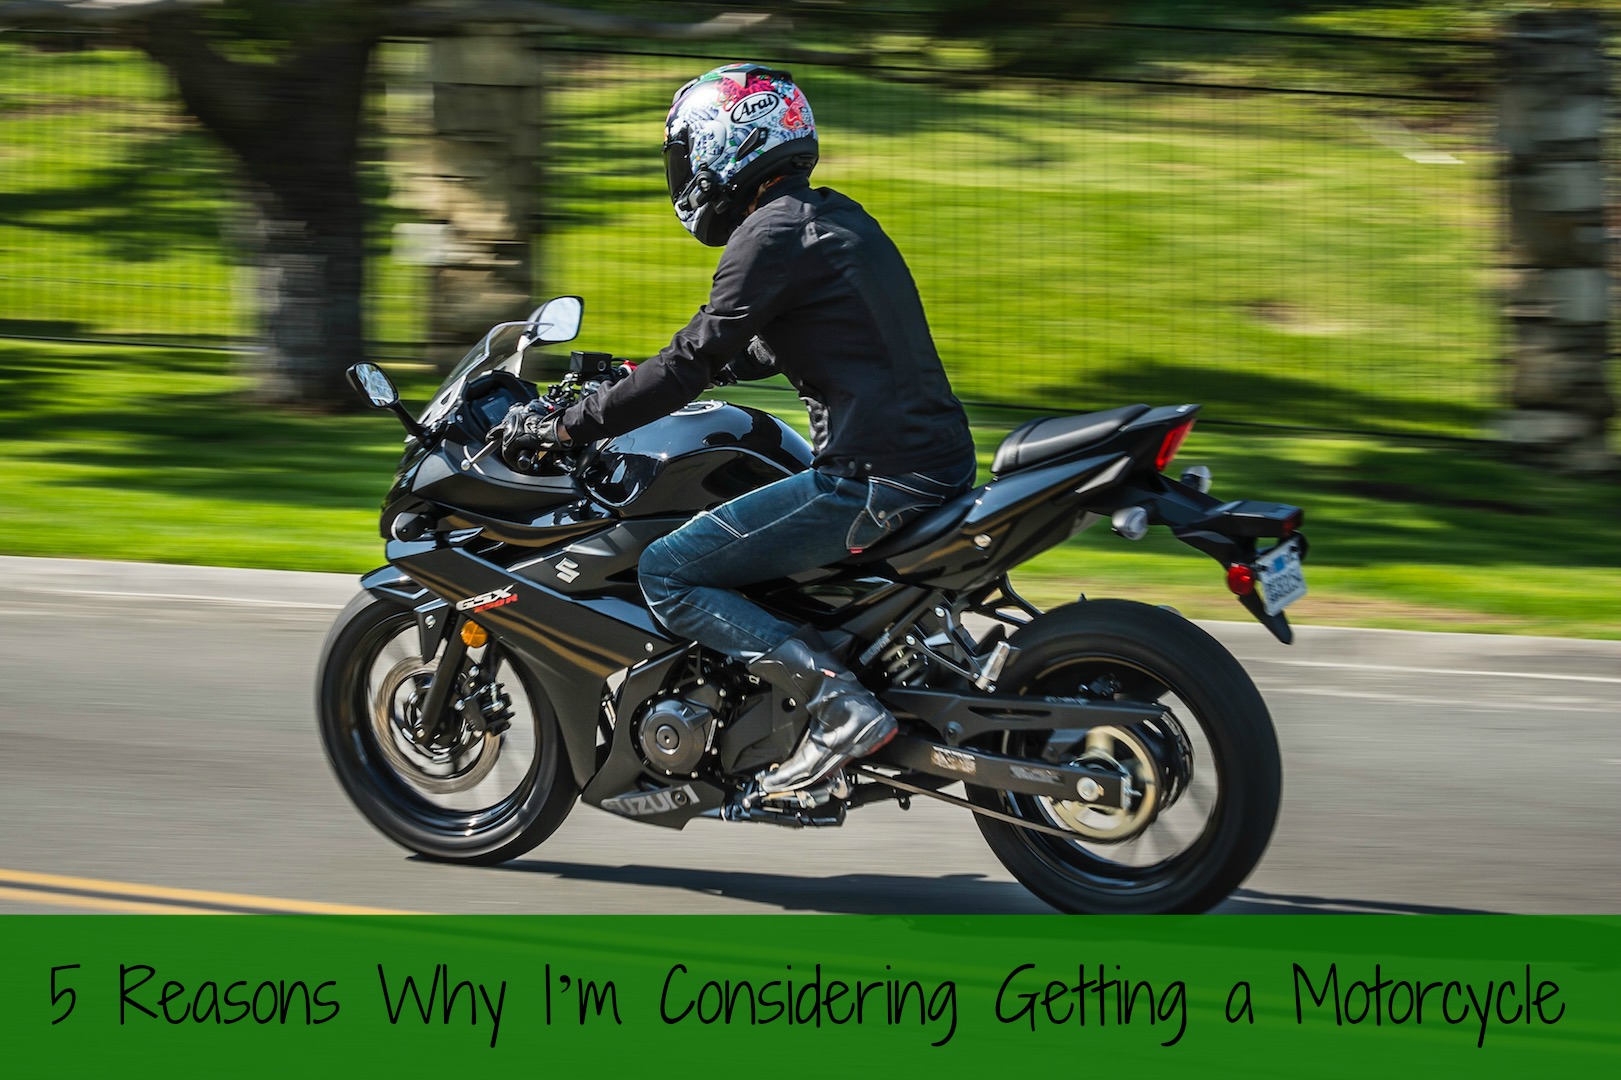 5 Reasons Why I’m Considering Getting a Motorcycle